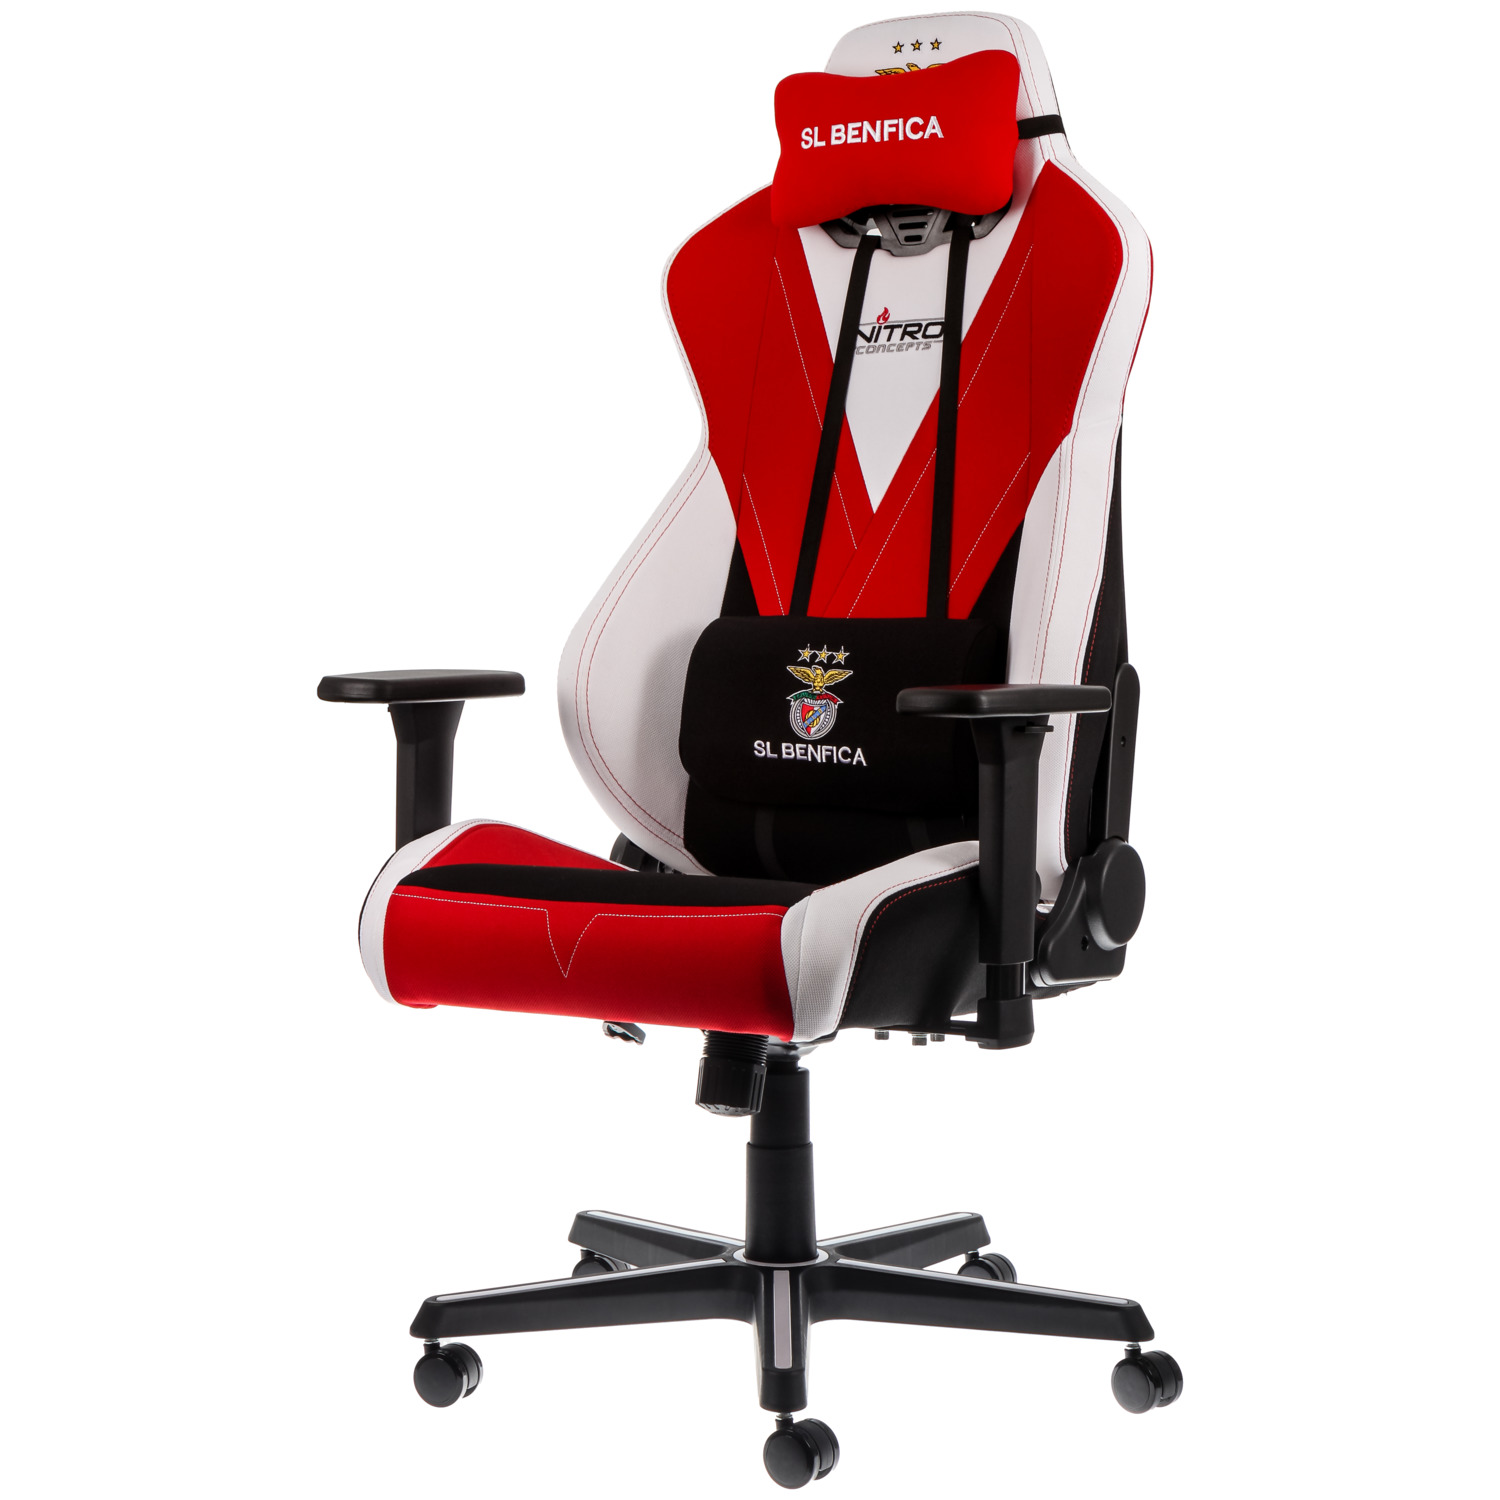 Nitro Concepts - S300 Gaming Chair SL Benfica Edition